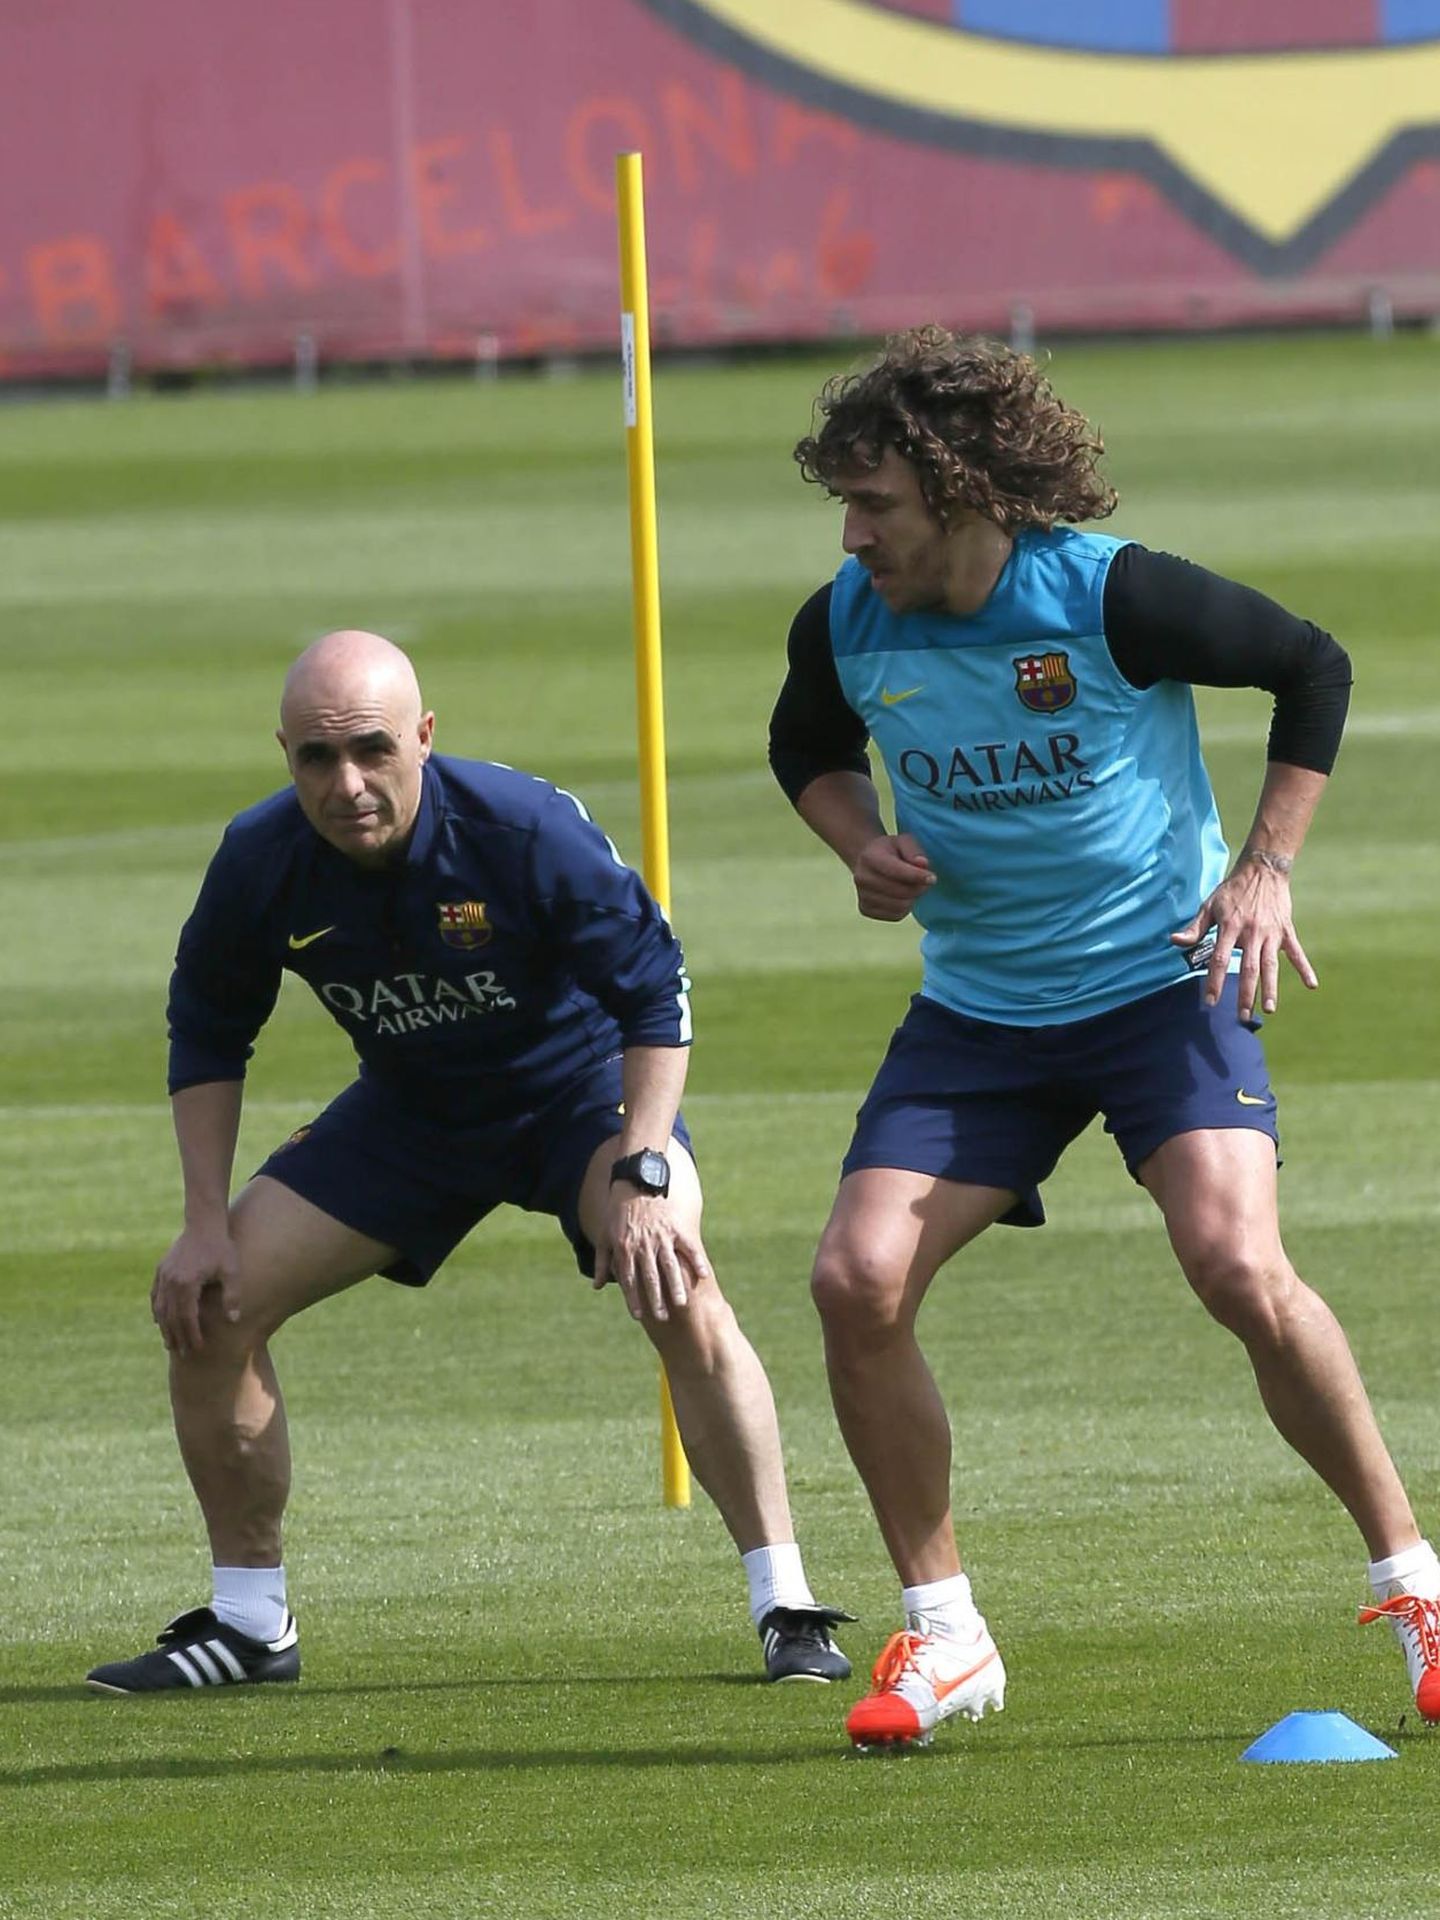 Barcelona's captain carles puyol runs beside his assistant during a training session at ciutat esportiva joan gamper training camp, near barcelona